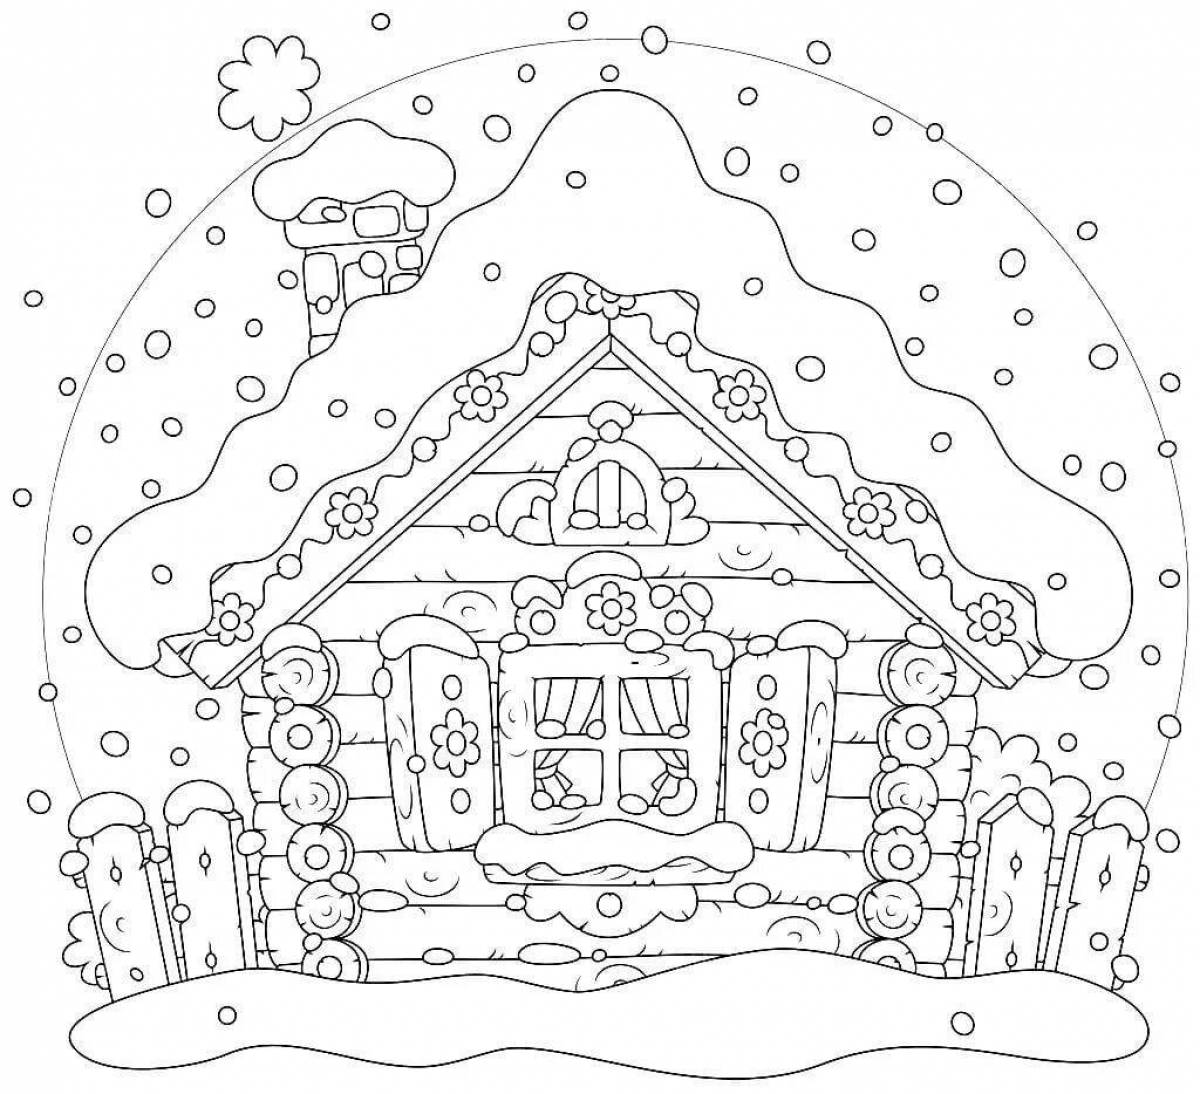 Adorable washcloth and ice hut coloring book